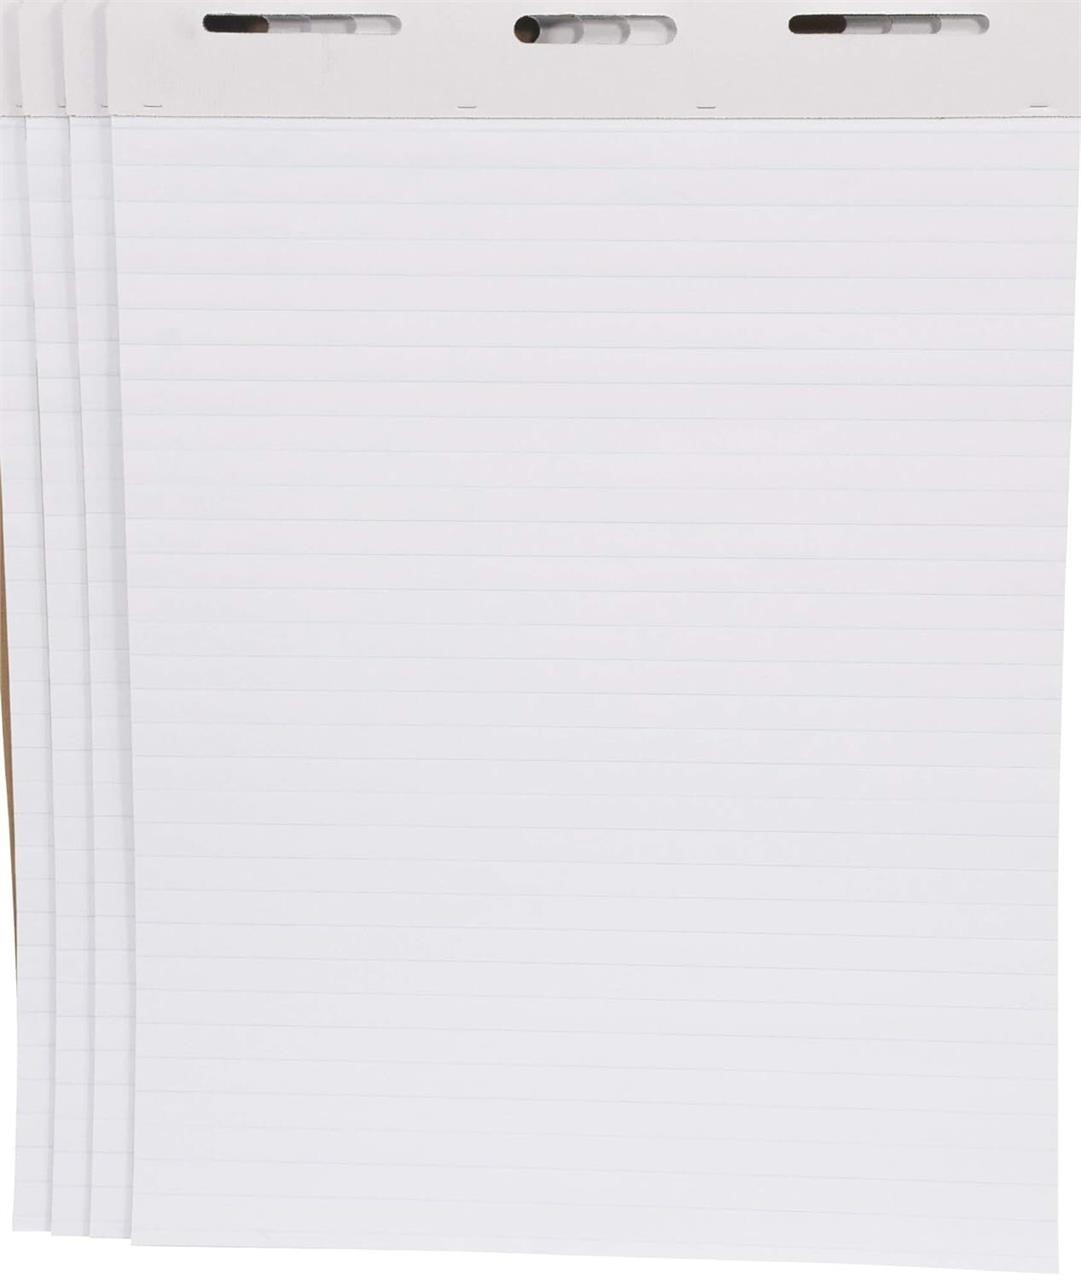 School Smart Easel Pads  27x34  50 Sheets  4 Pack